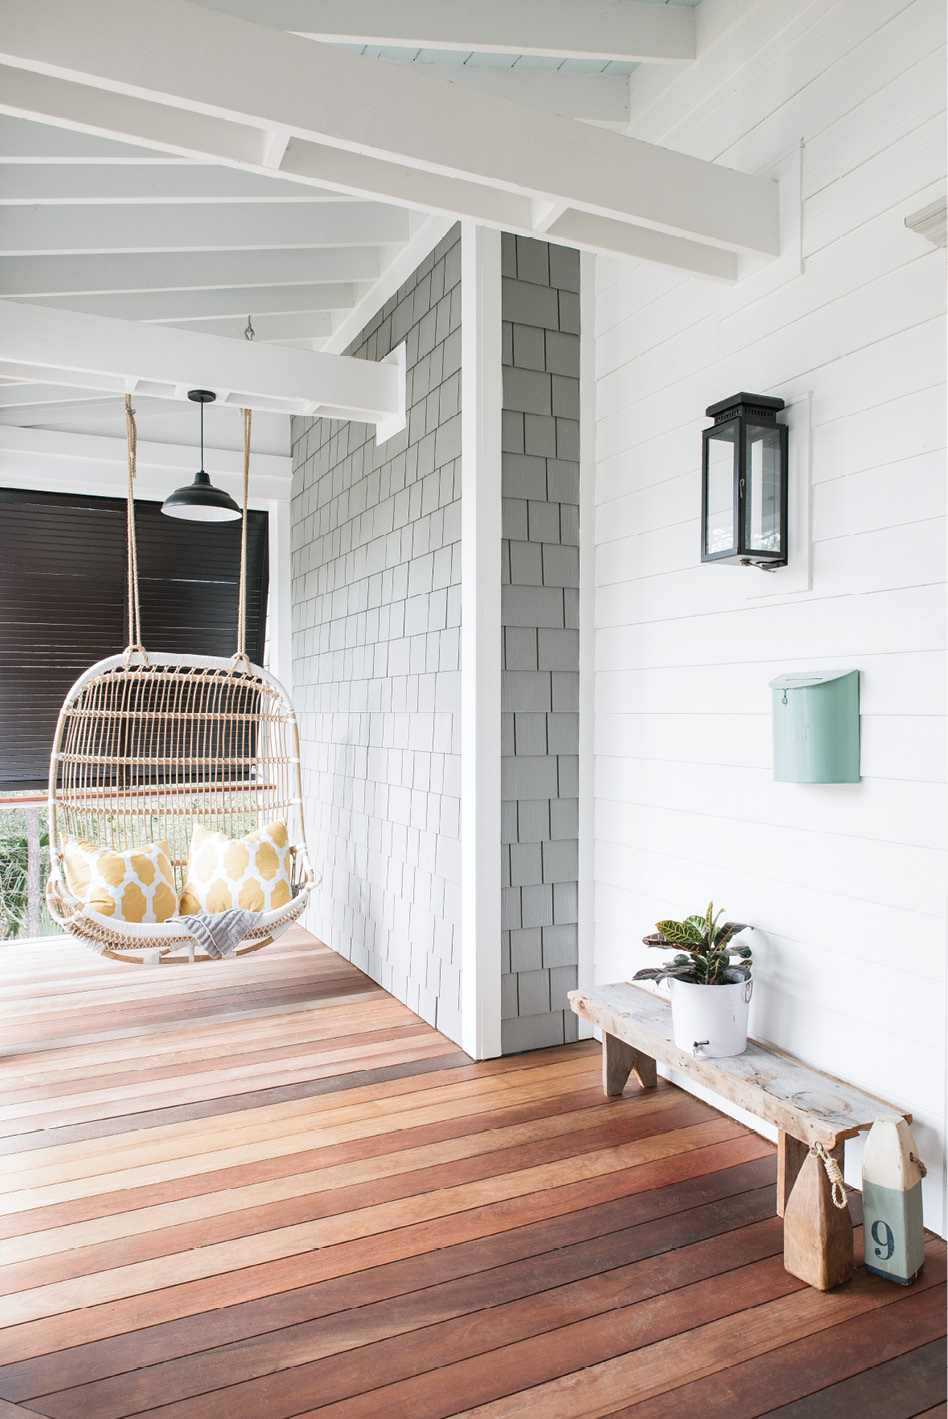 “I love that the design is modern yet has a vintage appeal about it,” says Melissa about the rattan porch